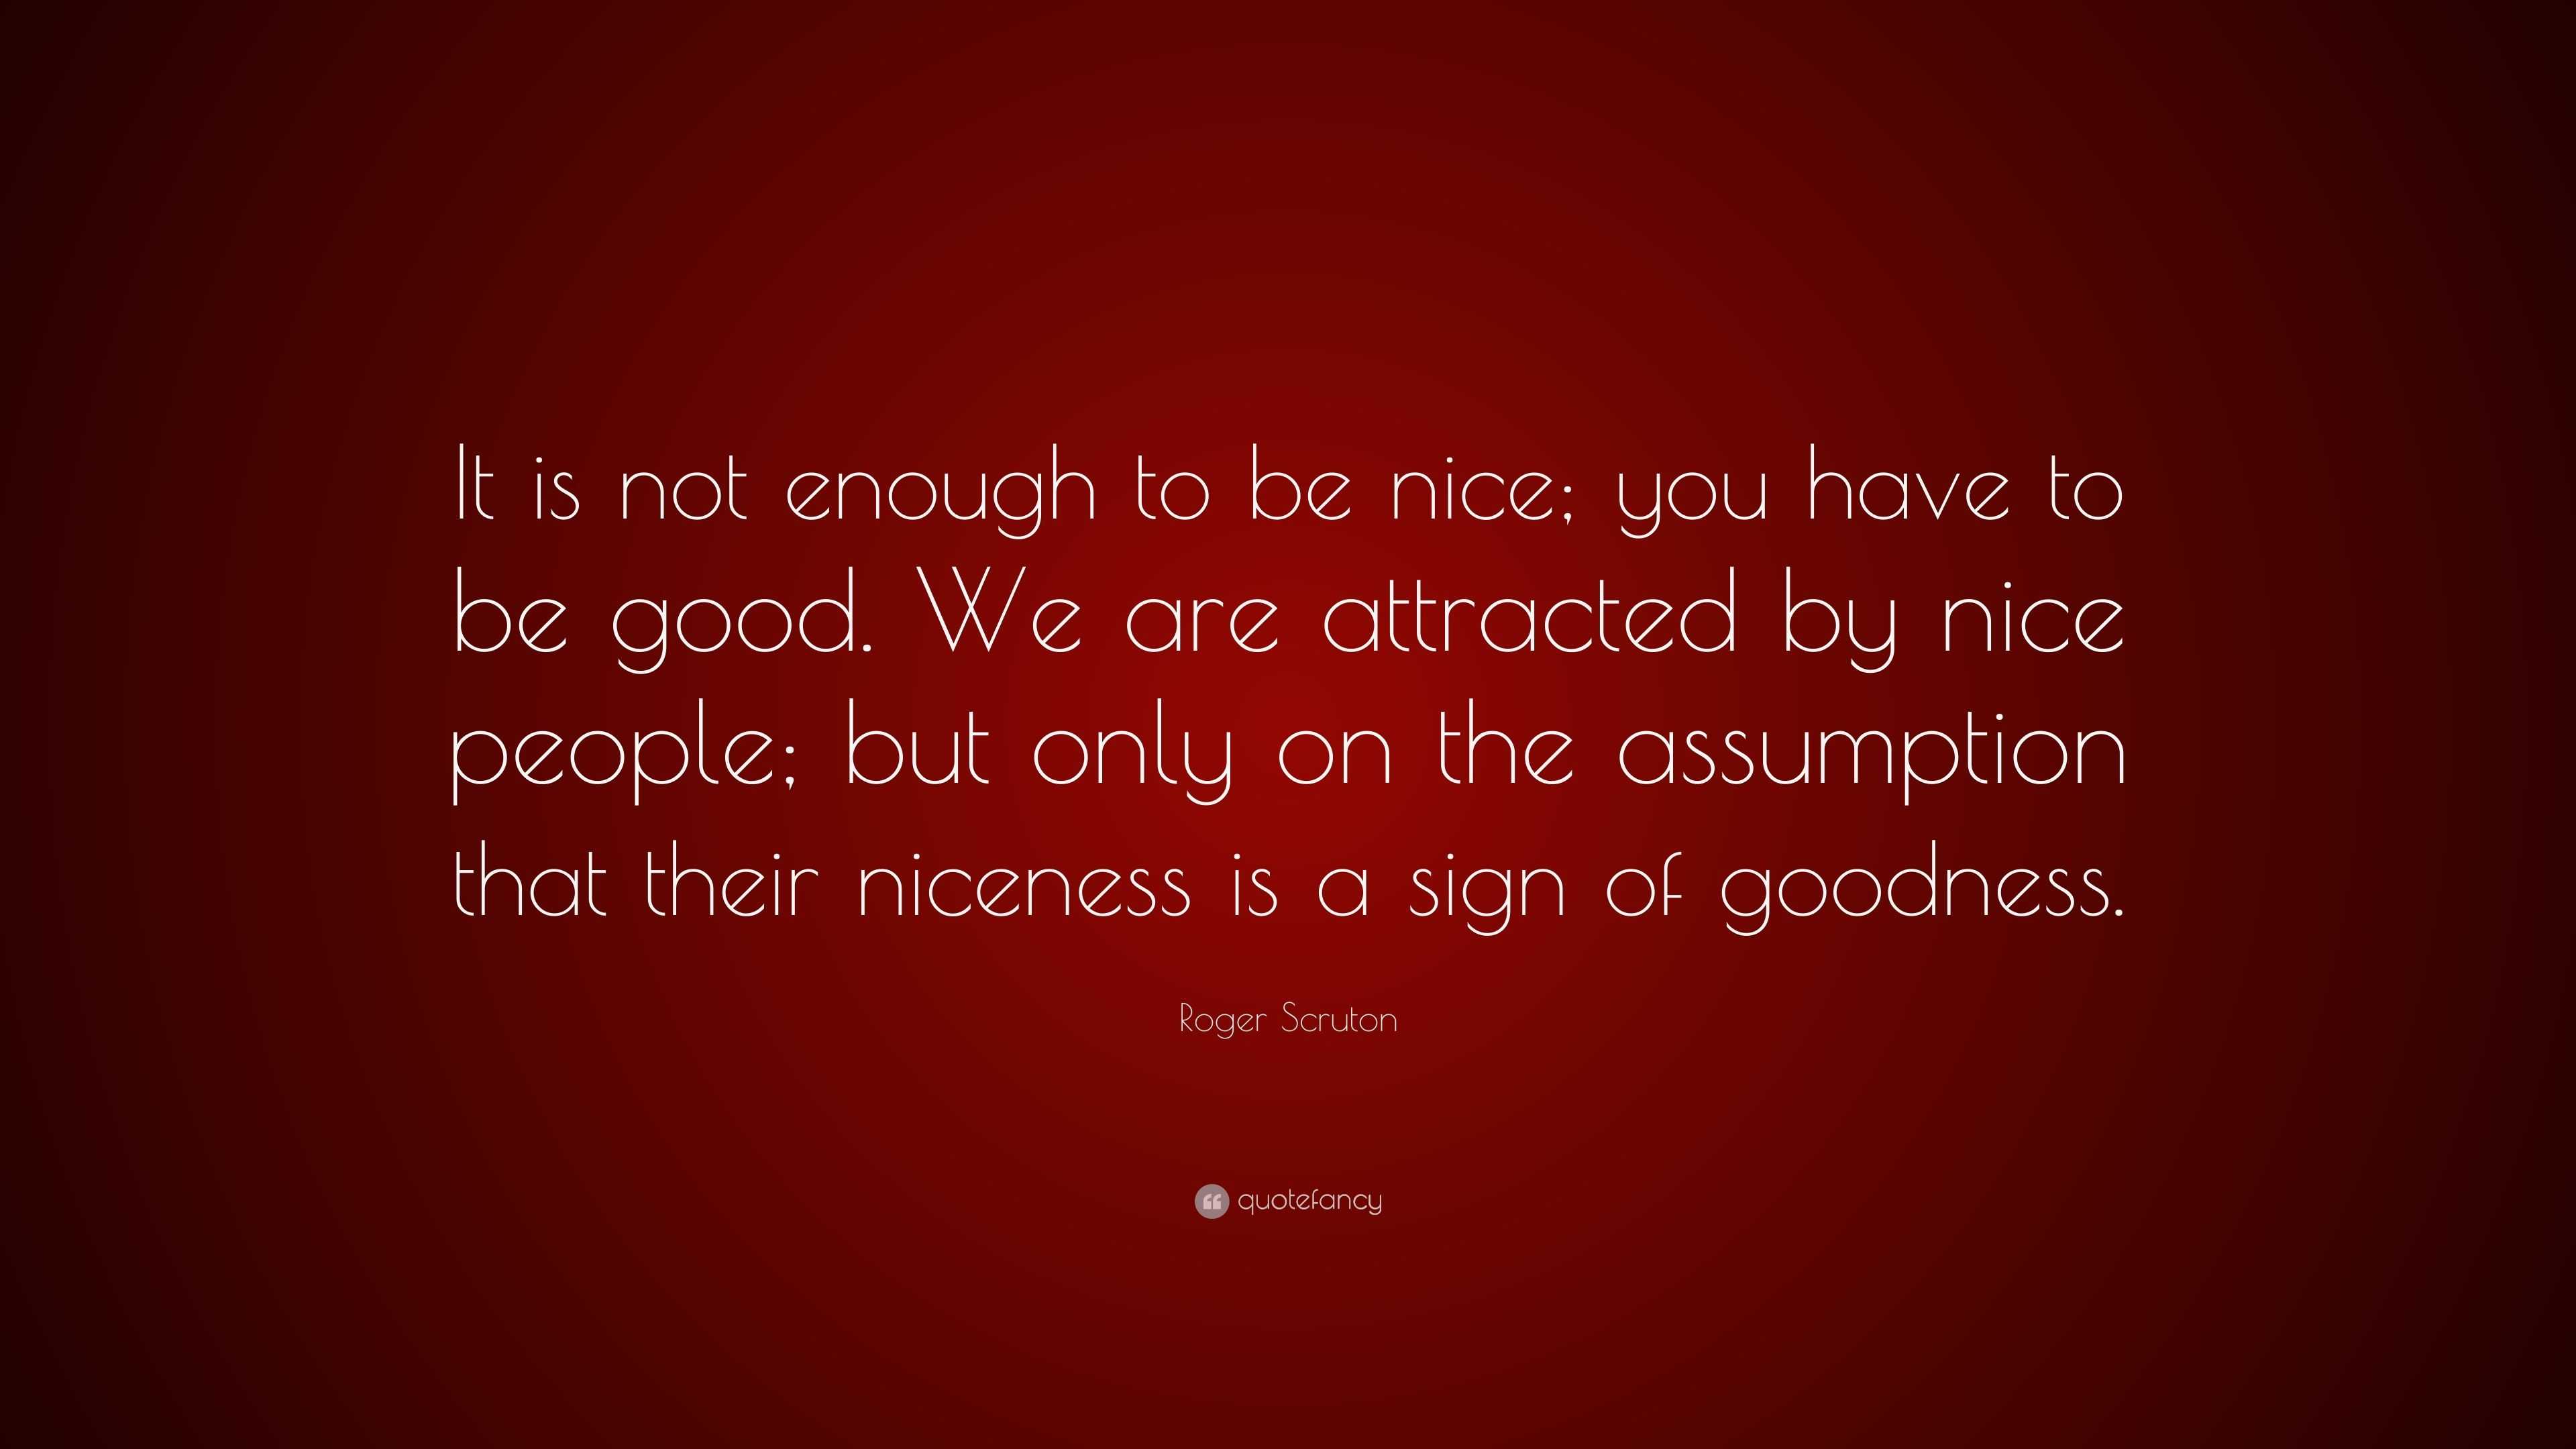 Roger Scruton Quote: “It is not enough to be nice; you have